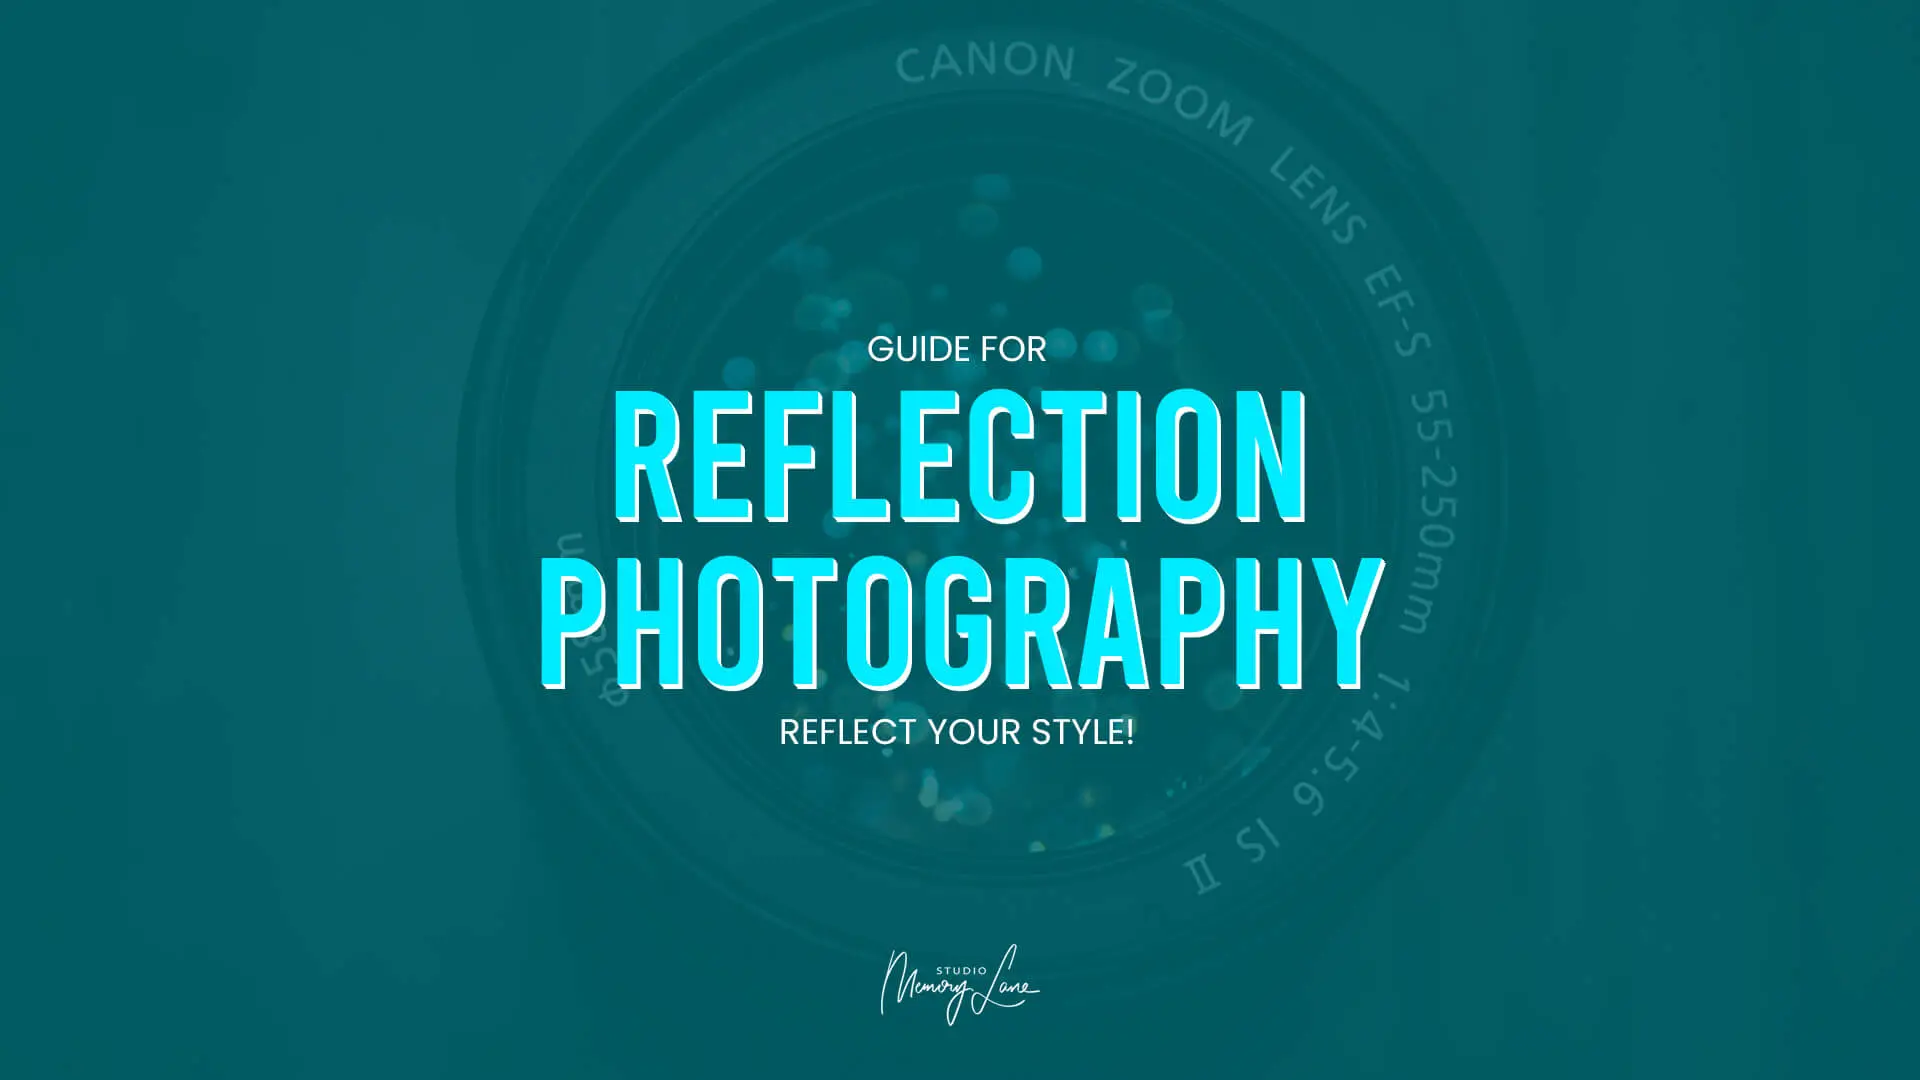 Guide for reflection photography